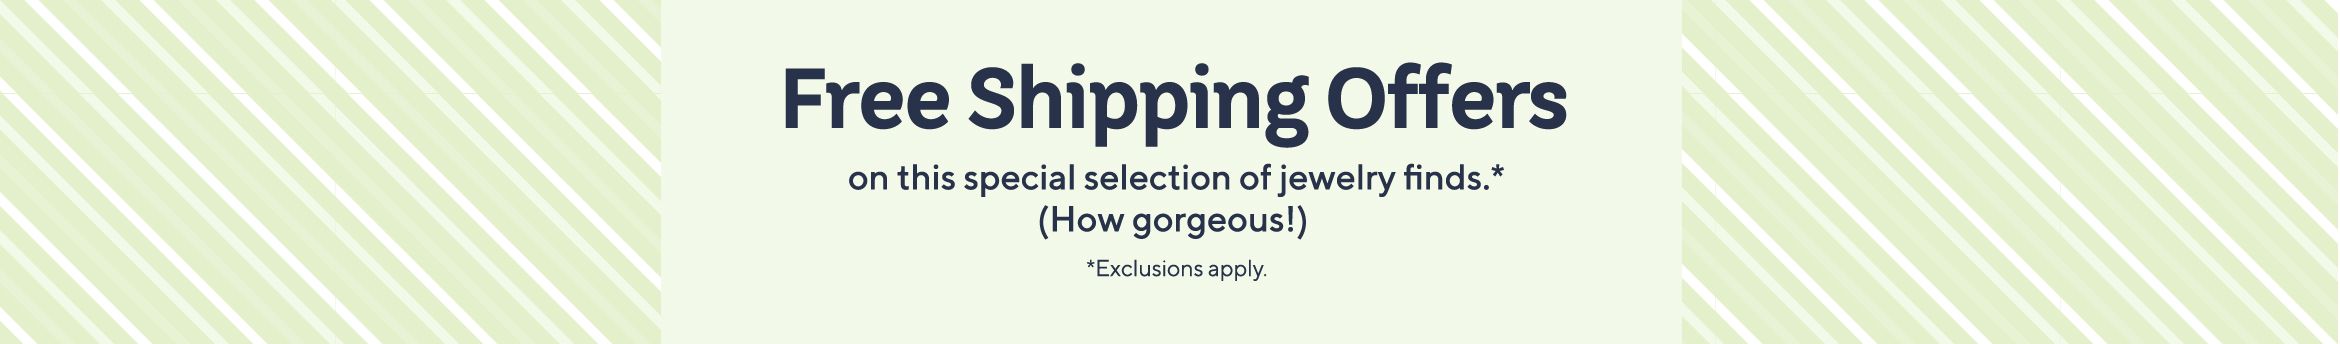 Free Shipping Offers on this special selection of jewelry finds.* (How gorgeous!) *Exclusions apply.